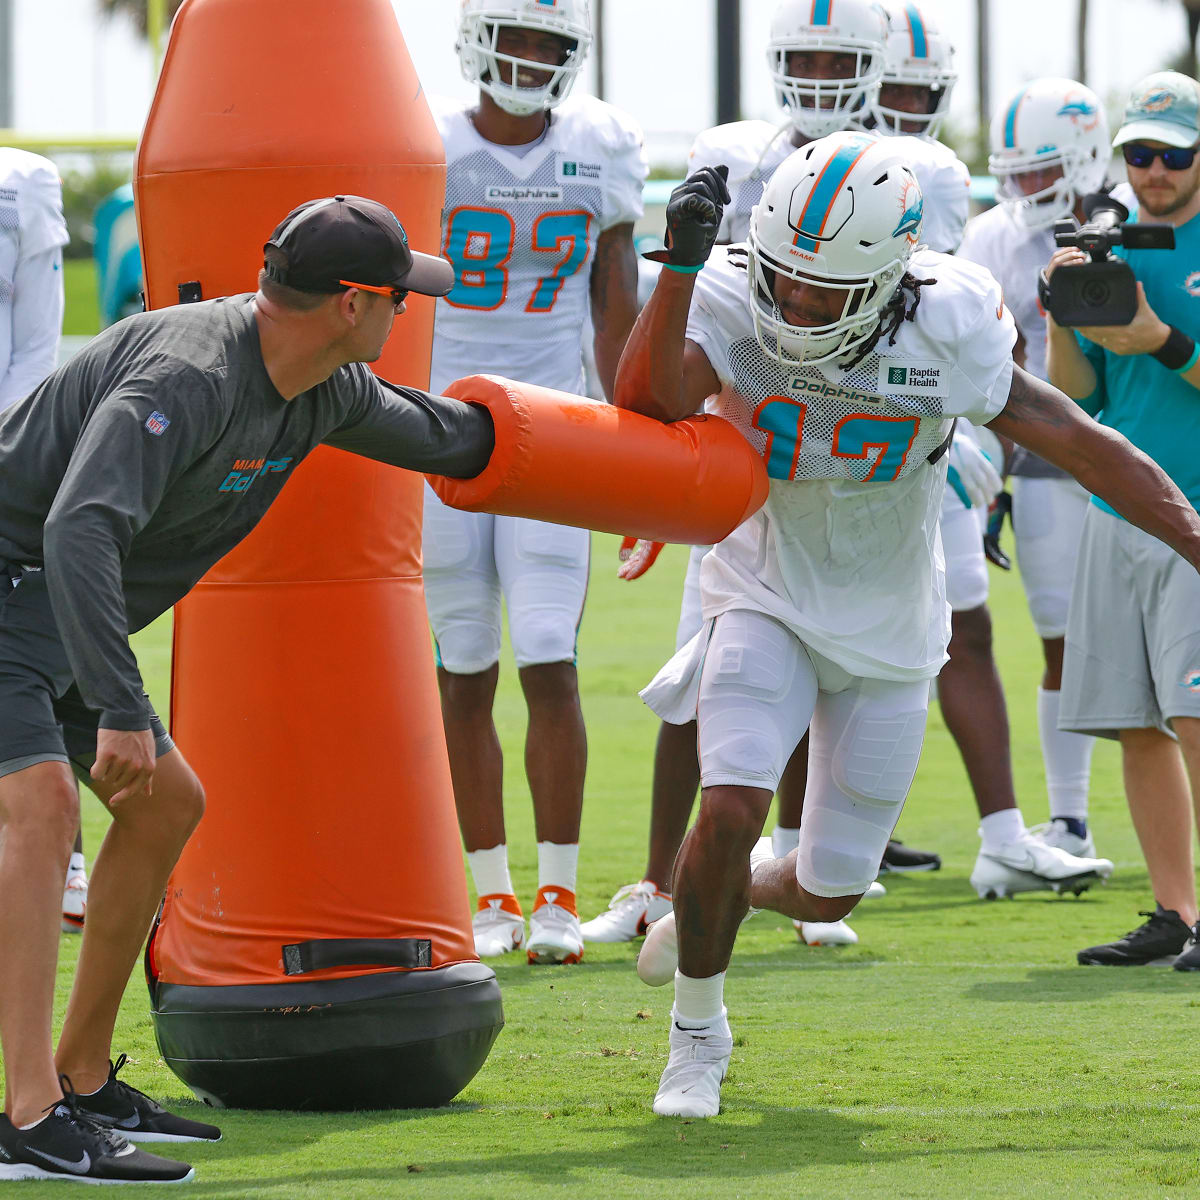 Jaylen Waddle flashing game-changing explosiveness for Dolphins